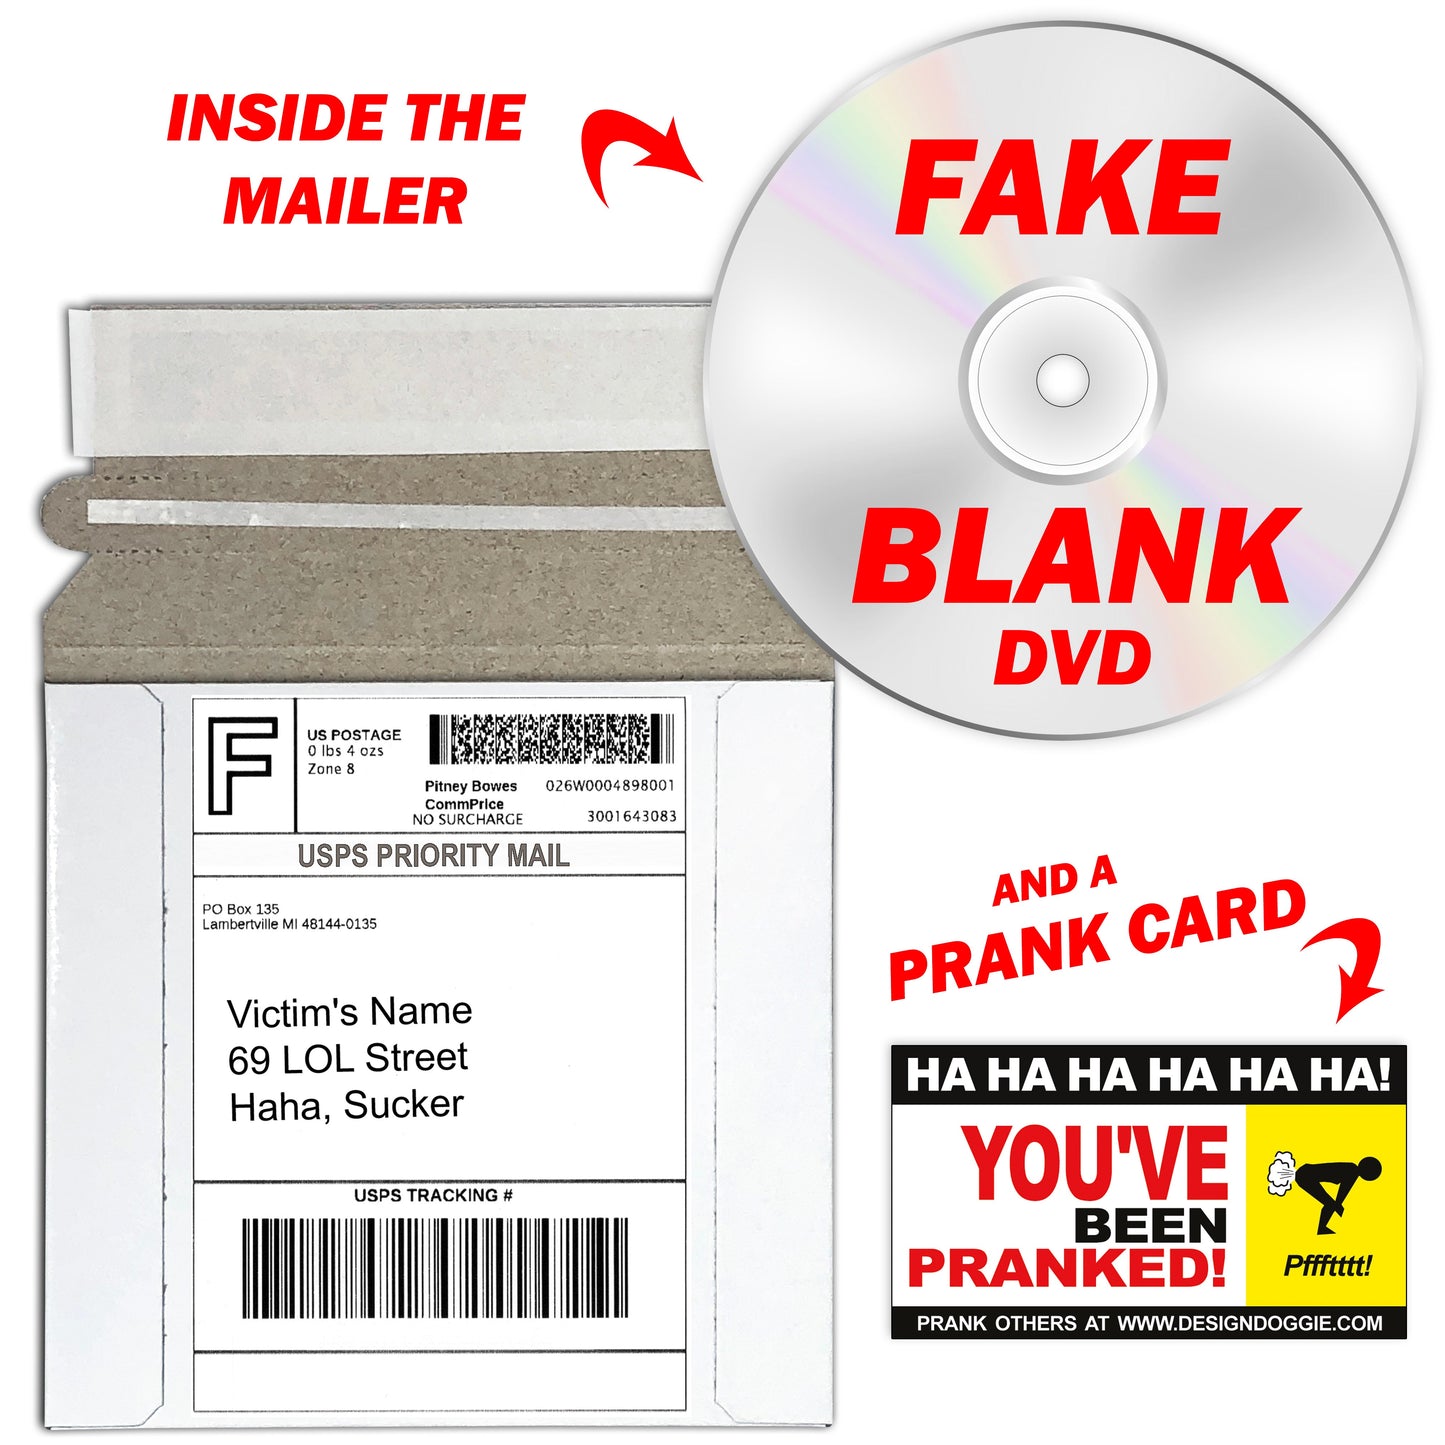 Parking in the Rear Fake DVD